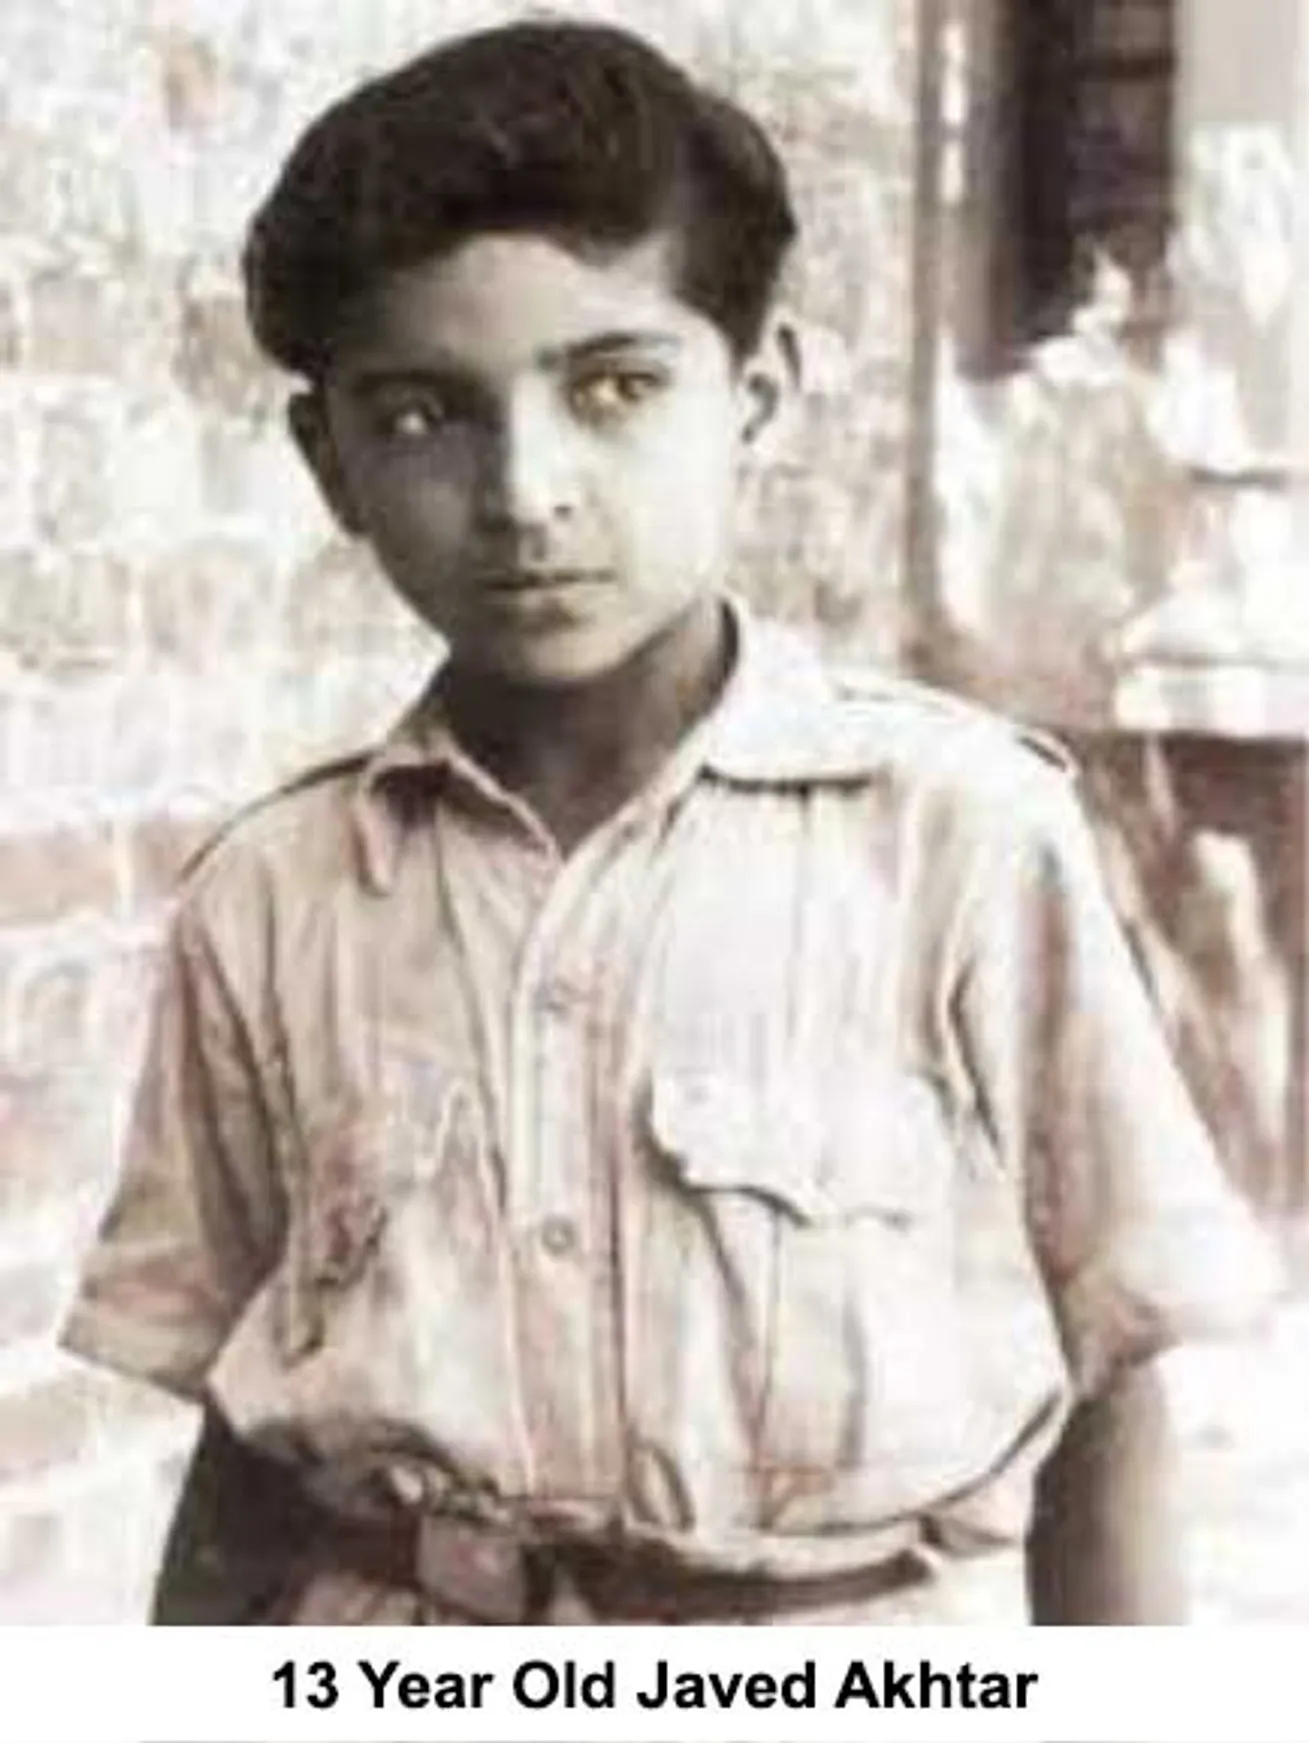 13 year old javed akhtar